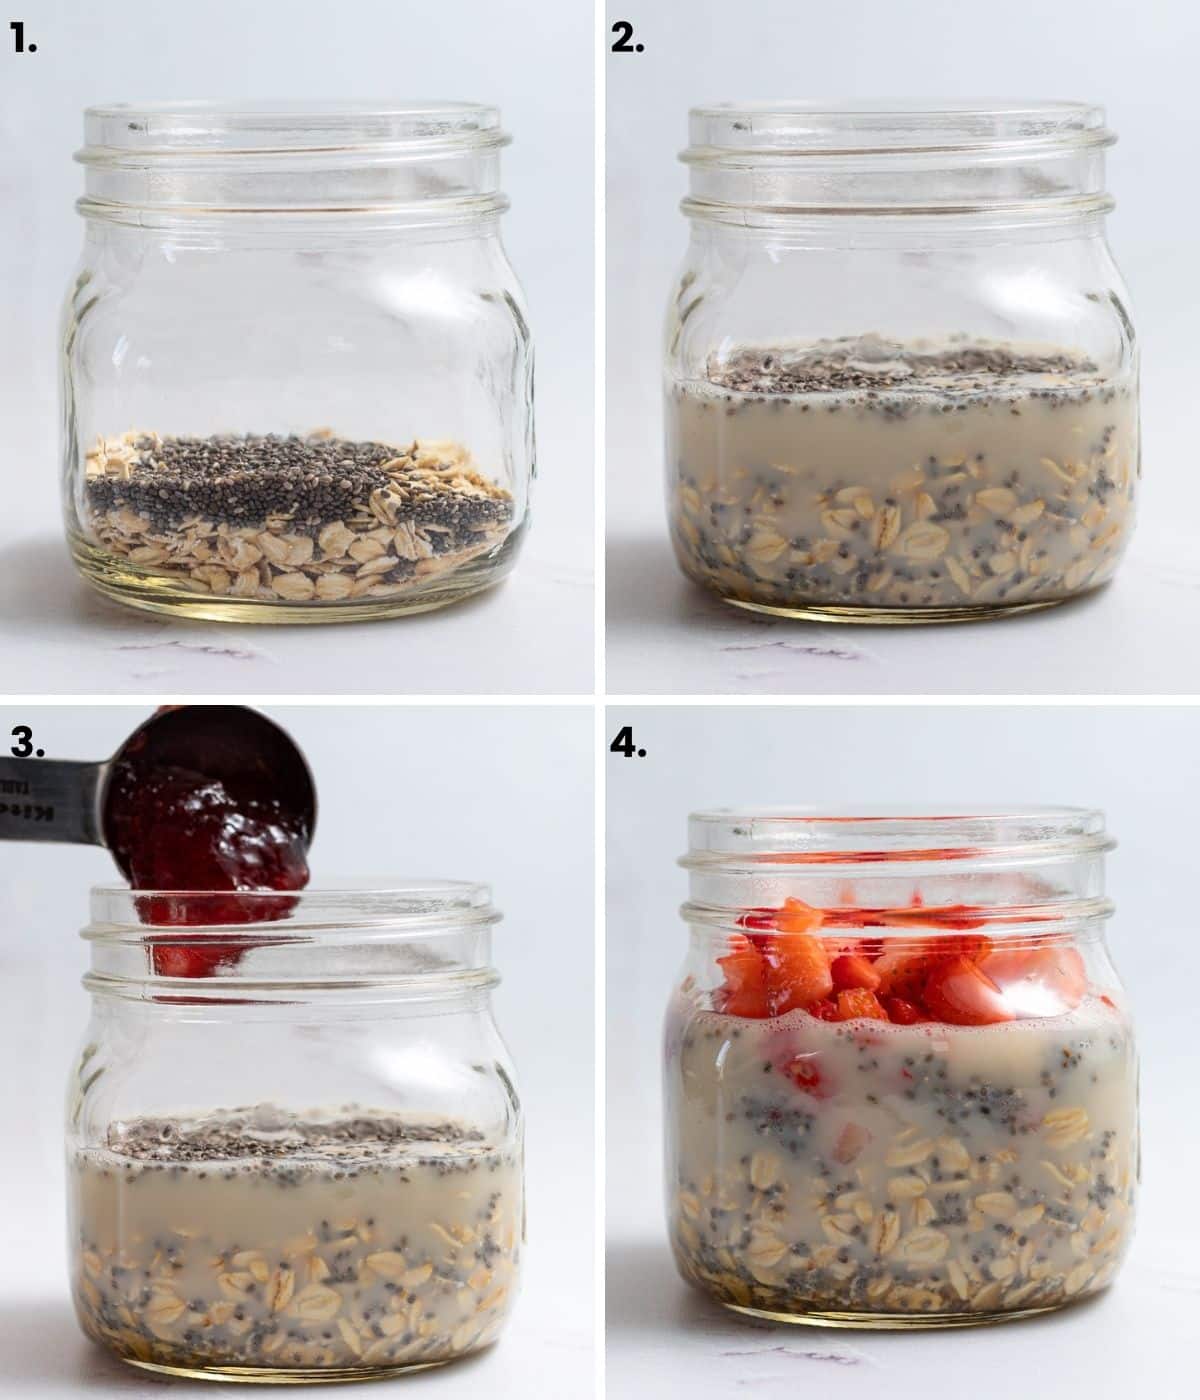 how to make strawberry overnight oats in pictures (as per written instructions)